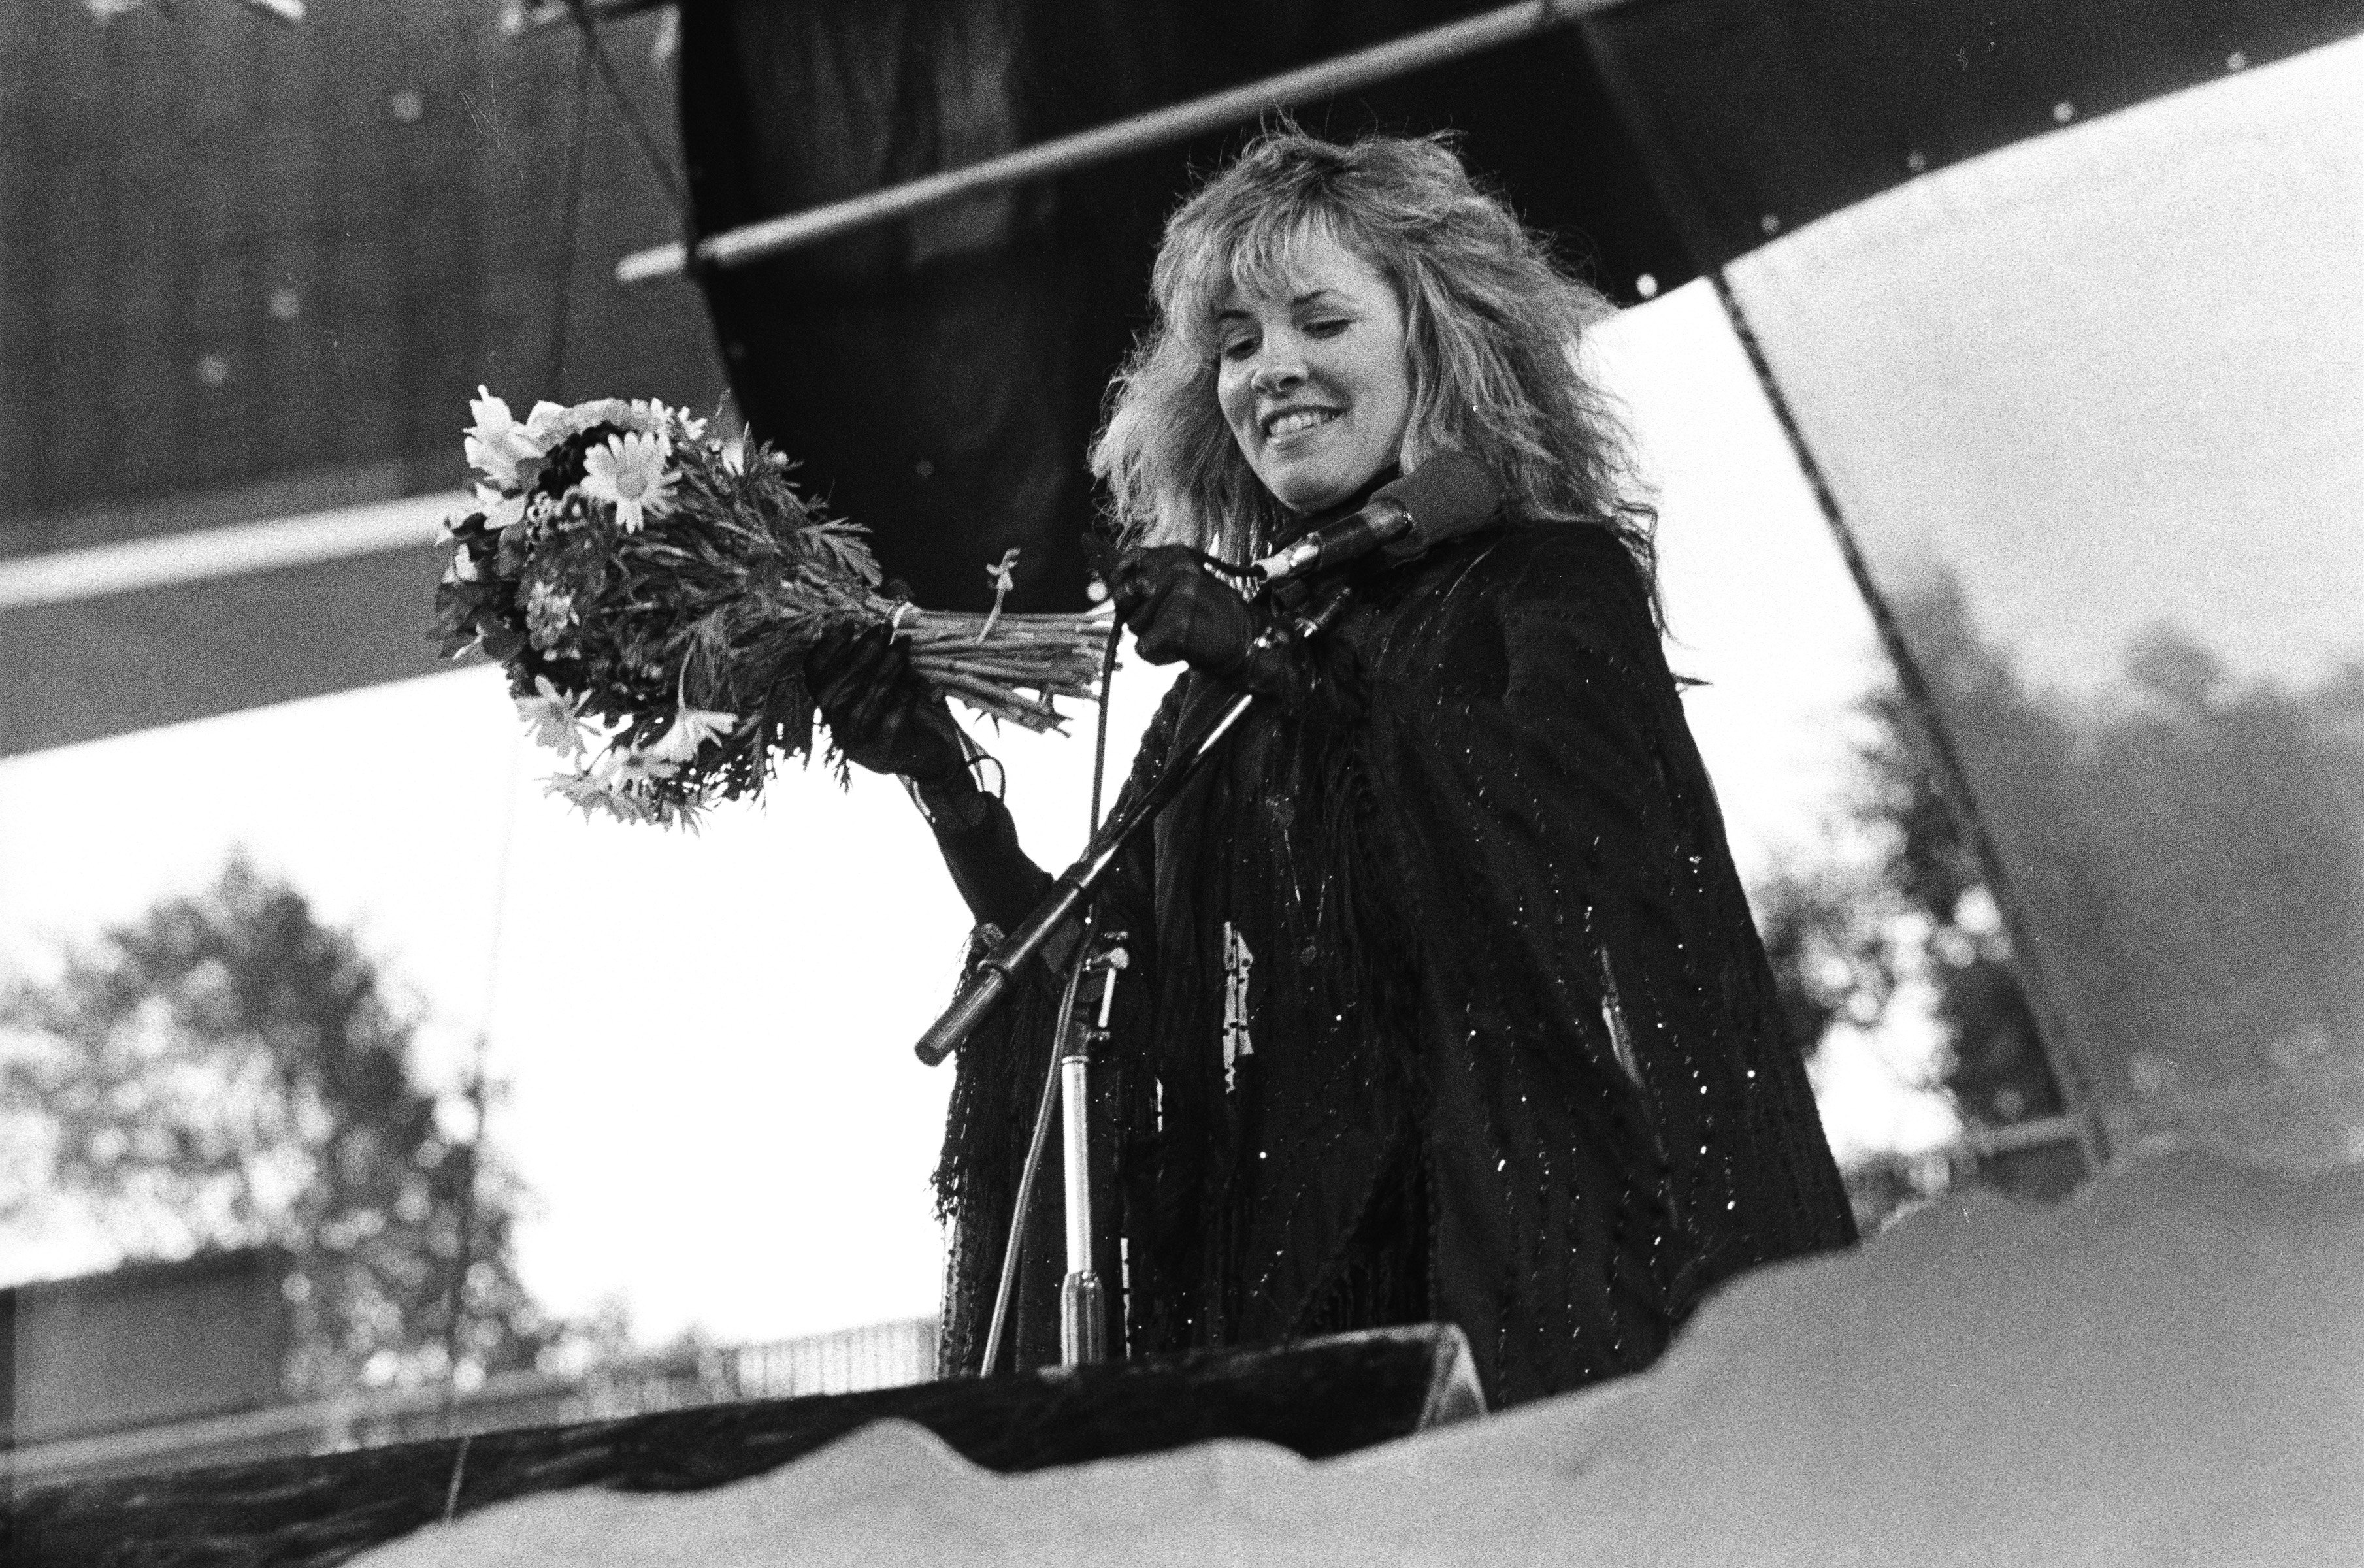 Stevie Nicks wears a long black dress and holds a bouquet of flowers onstage.